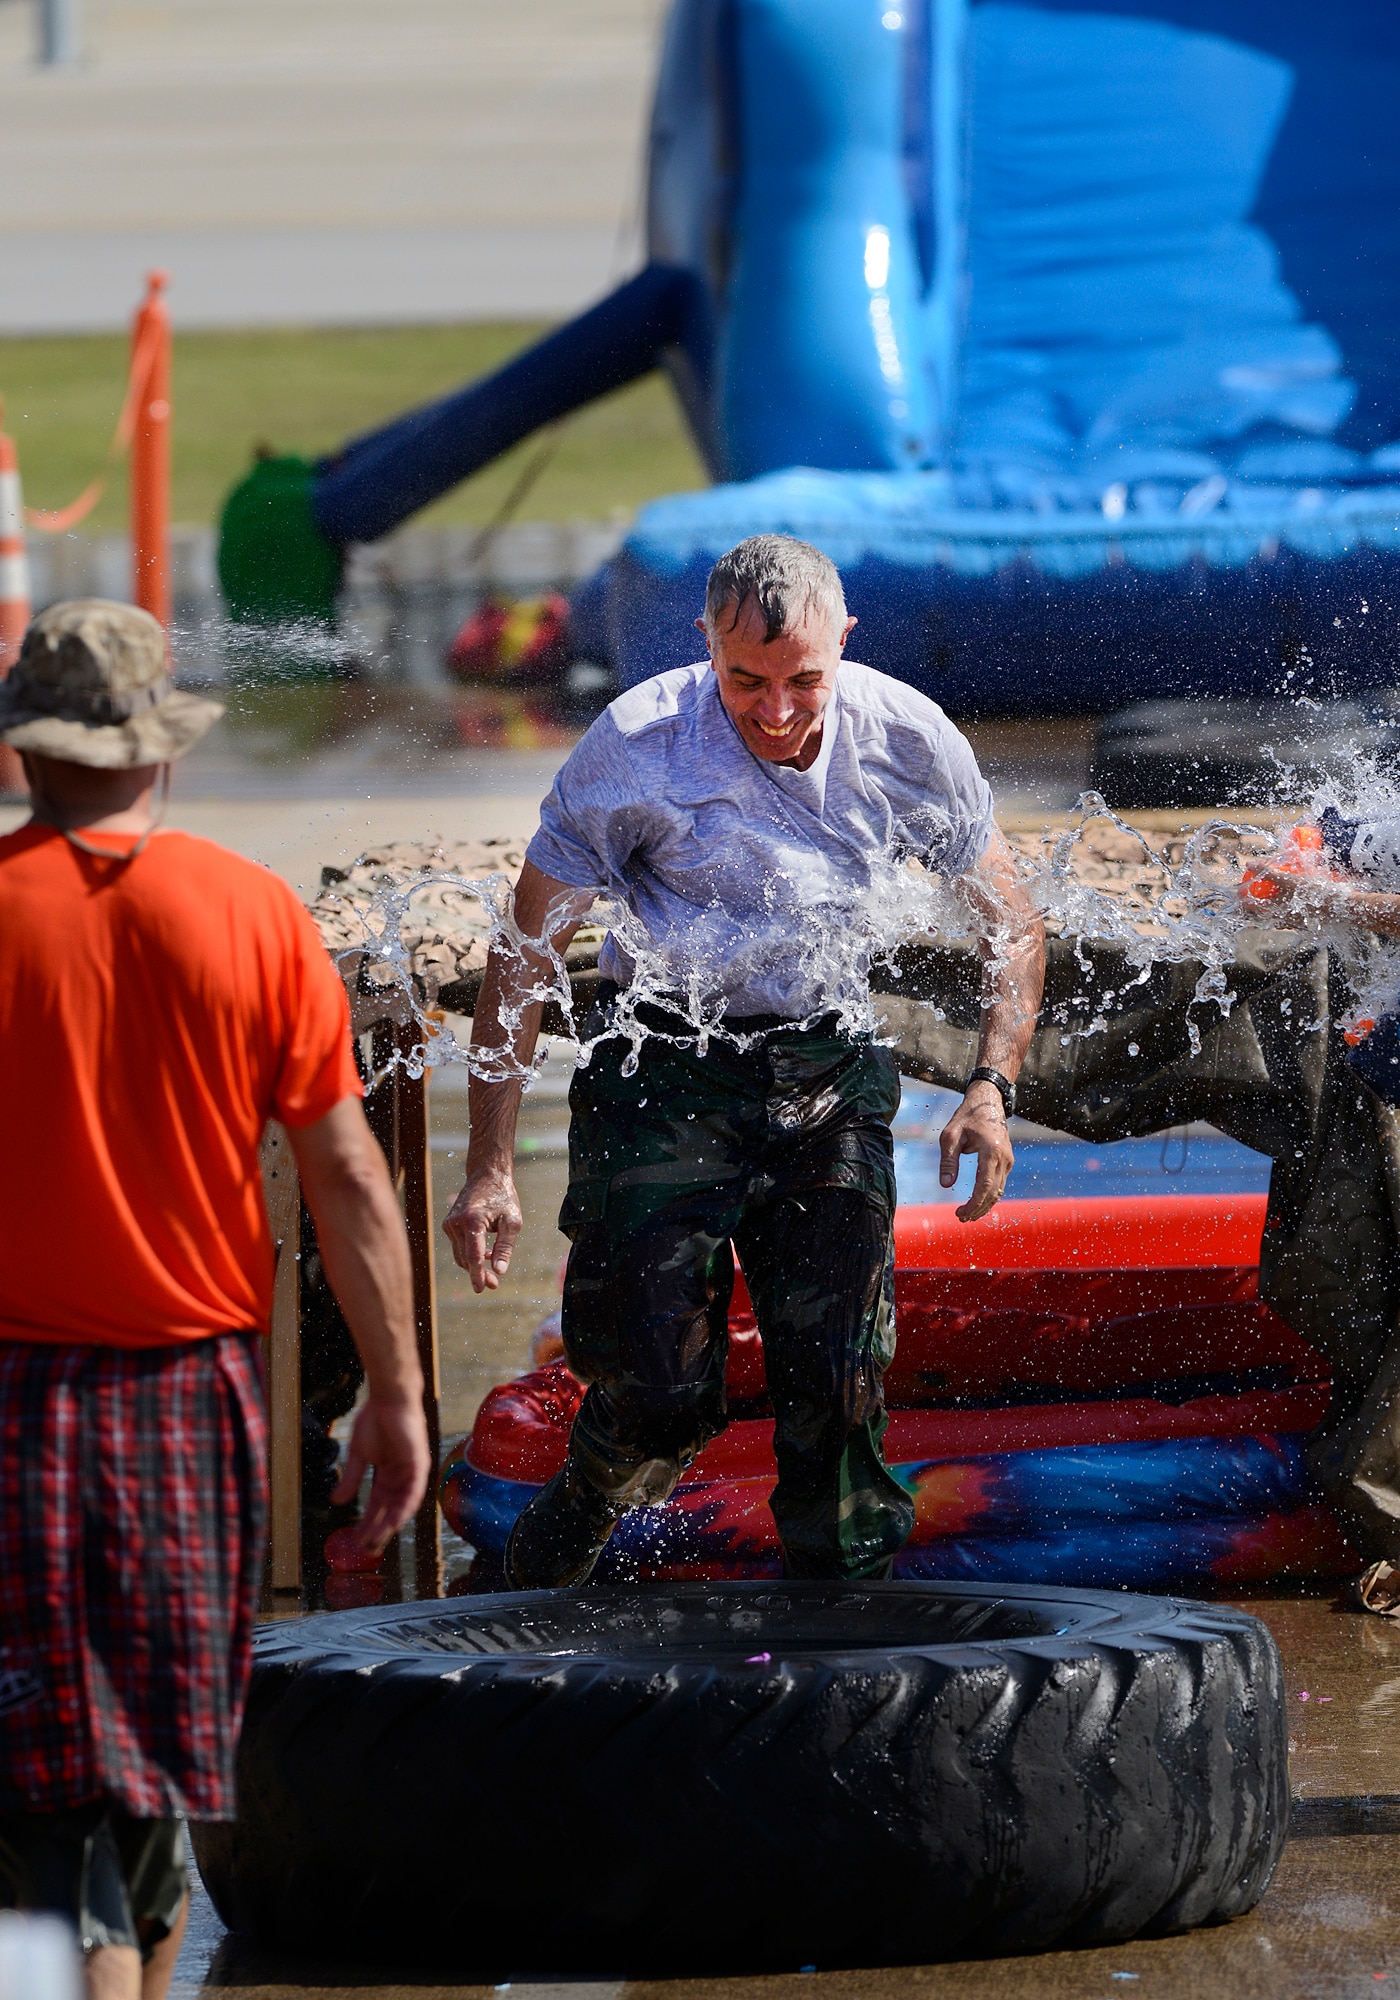 Chief Master Sgt. Paul Hammond, 138th Force Support Squadron, is doused with water while running the obstacle course during the 138th Fighter Wing's combat dining-in held Aug. 1, 2015 at the Tulsa Air National Guard base.  The wing's senior non-commissioned officer's council sponsored the event as a way to enhance camaraderie and promote esprit de corps throughout the ranks.   (U.S. National Guard photo by Master Sgt. Mark A. Moore/Released)